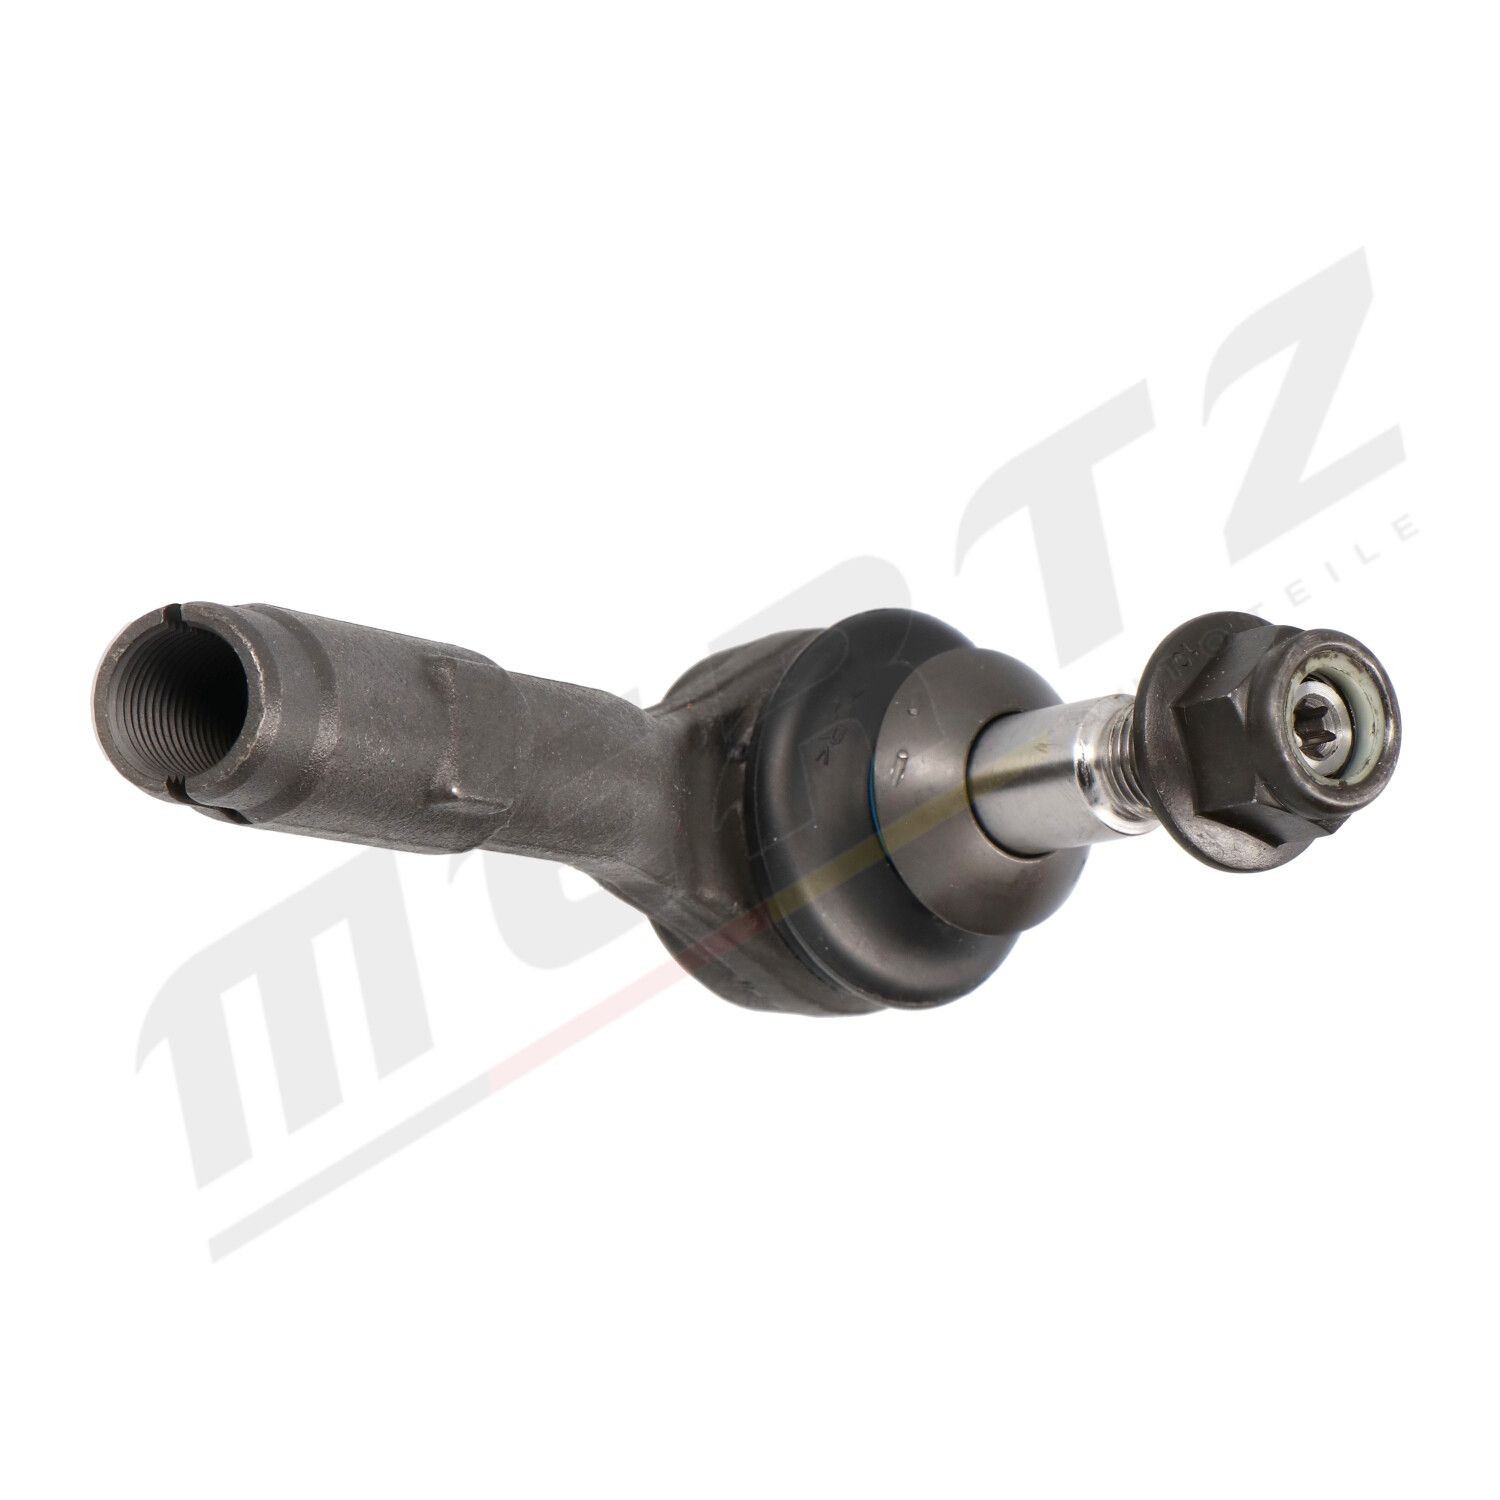 MERTZ M-S0096 Track rod end M14x1,5 mm, Front Axle Left, Front Axle Right, with self-locking nut